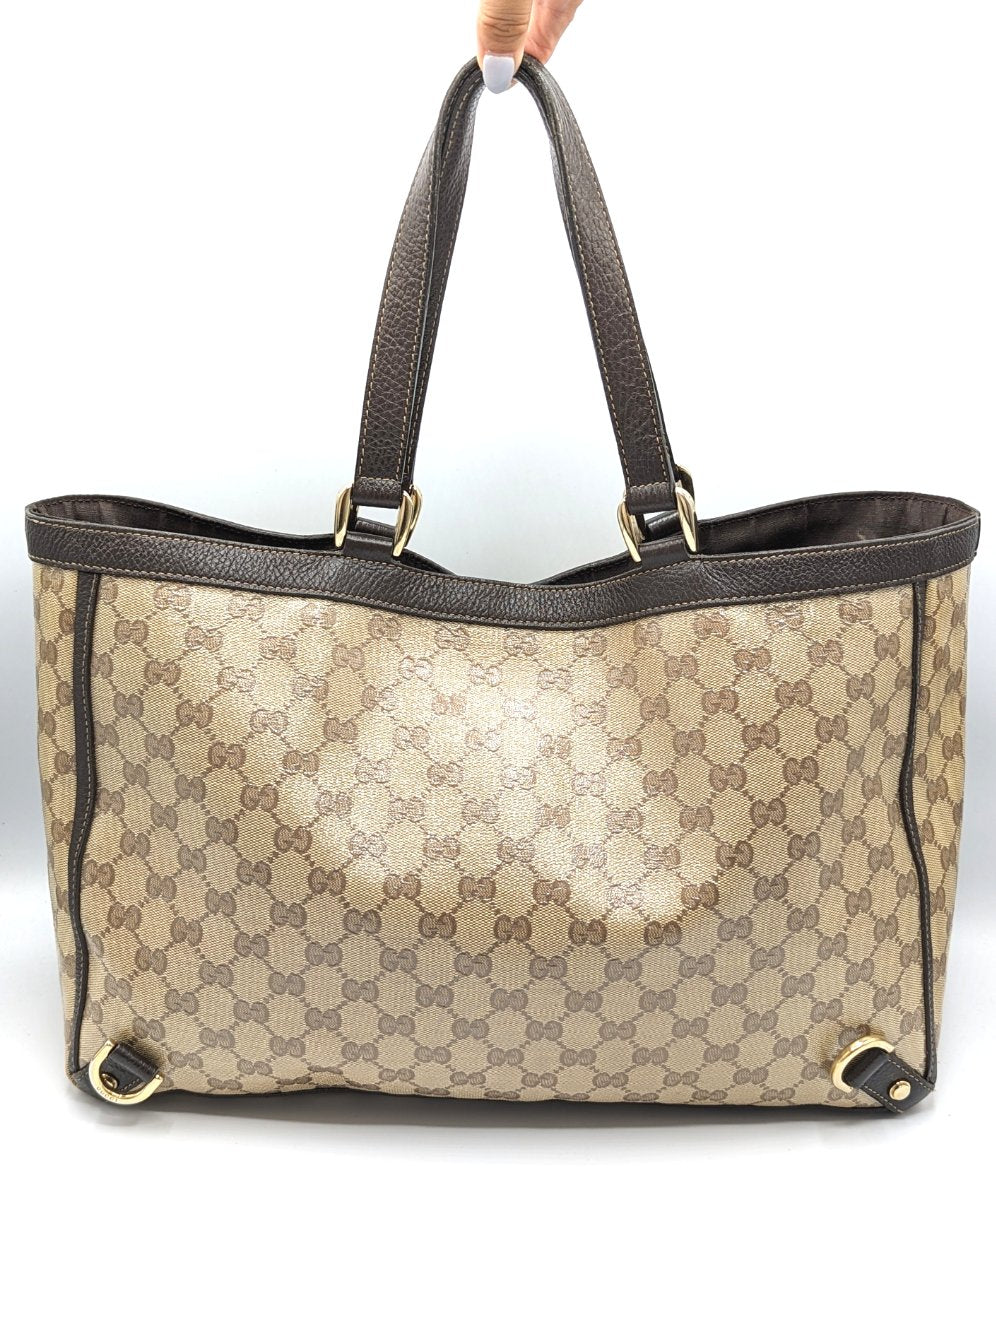 Gucci Crystal Monogram Large Abbey Tote